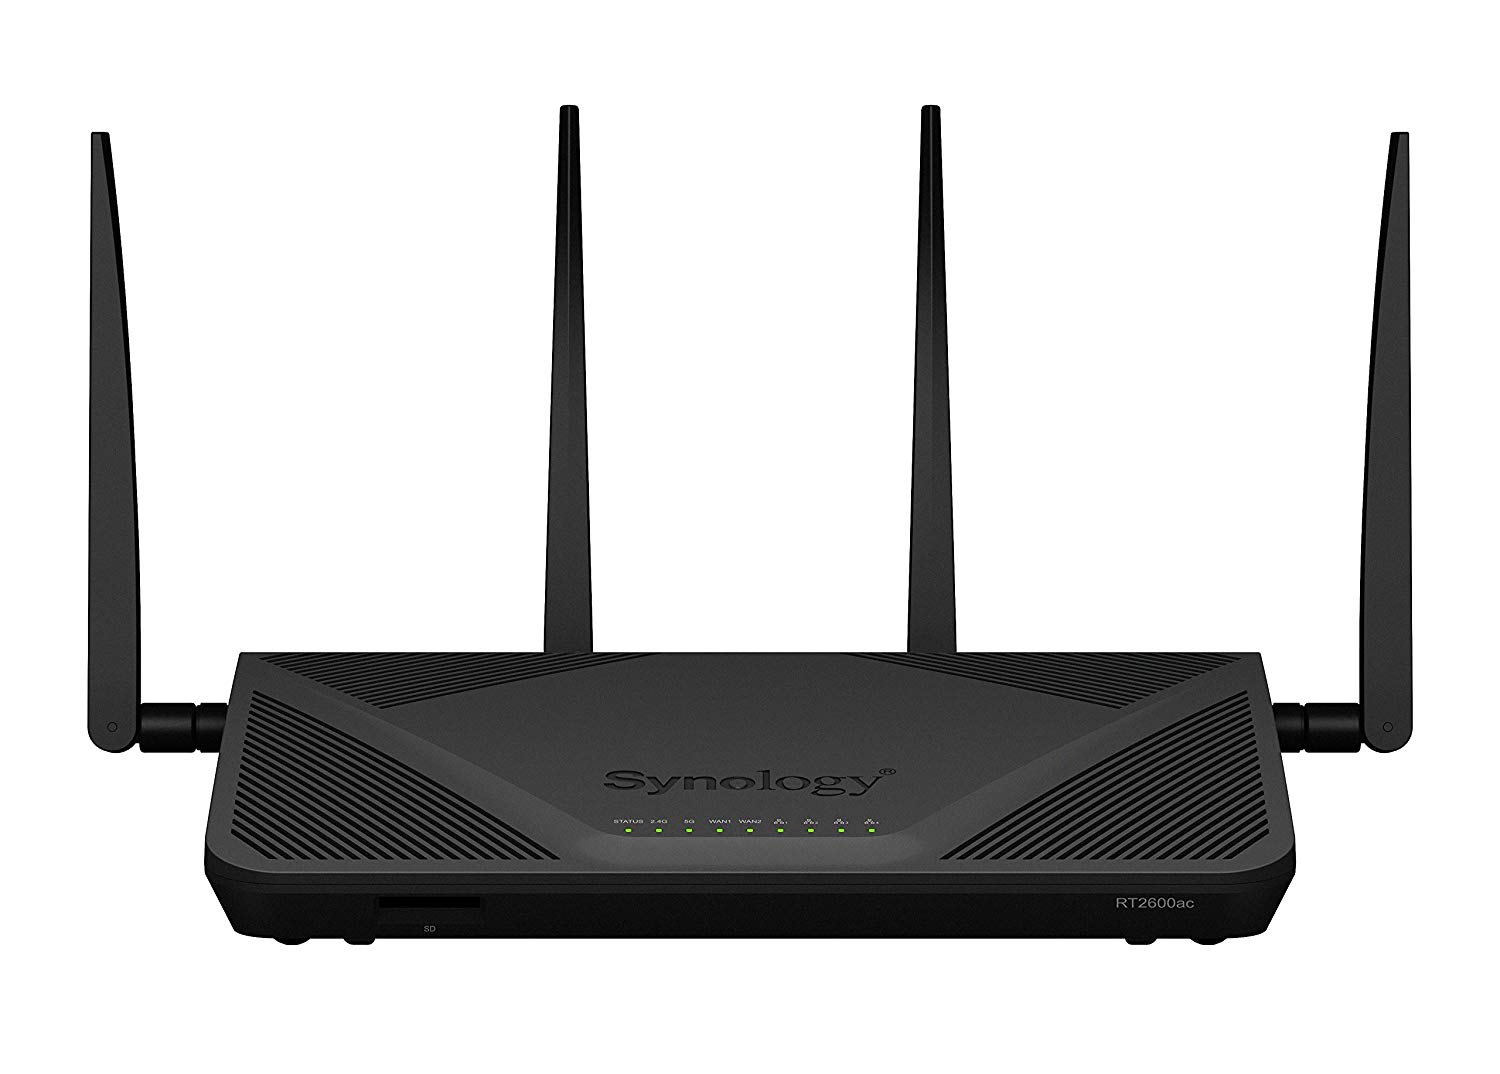 10 Best WiFi Routers in Singapore 2020 - Top Brands